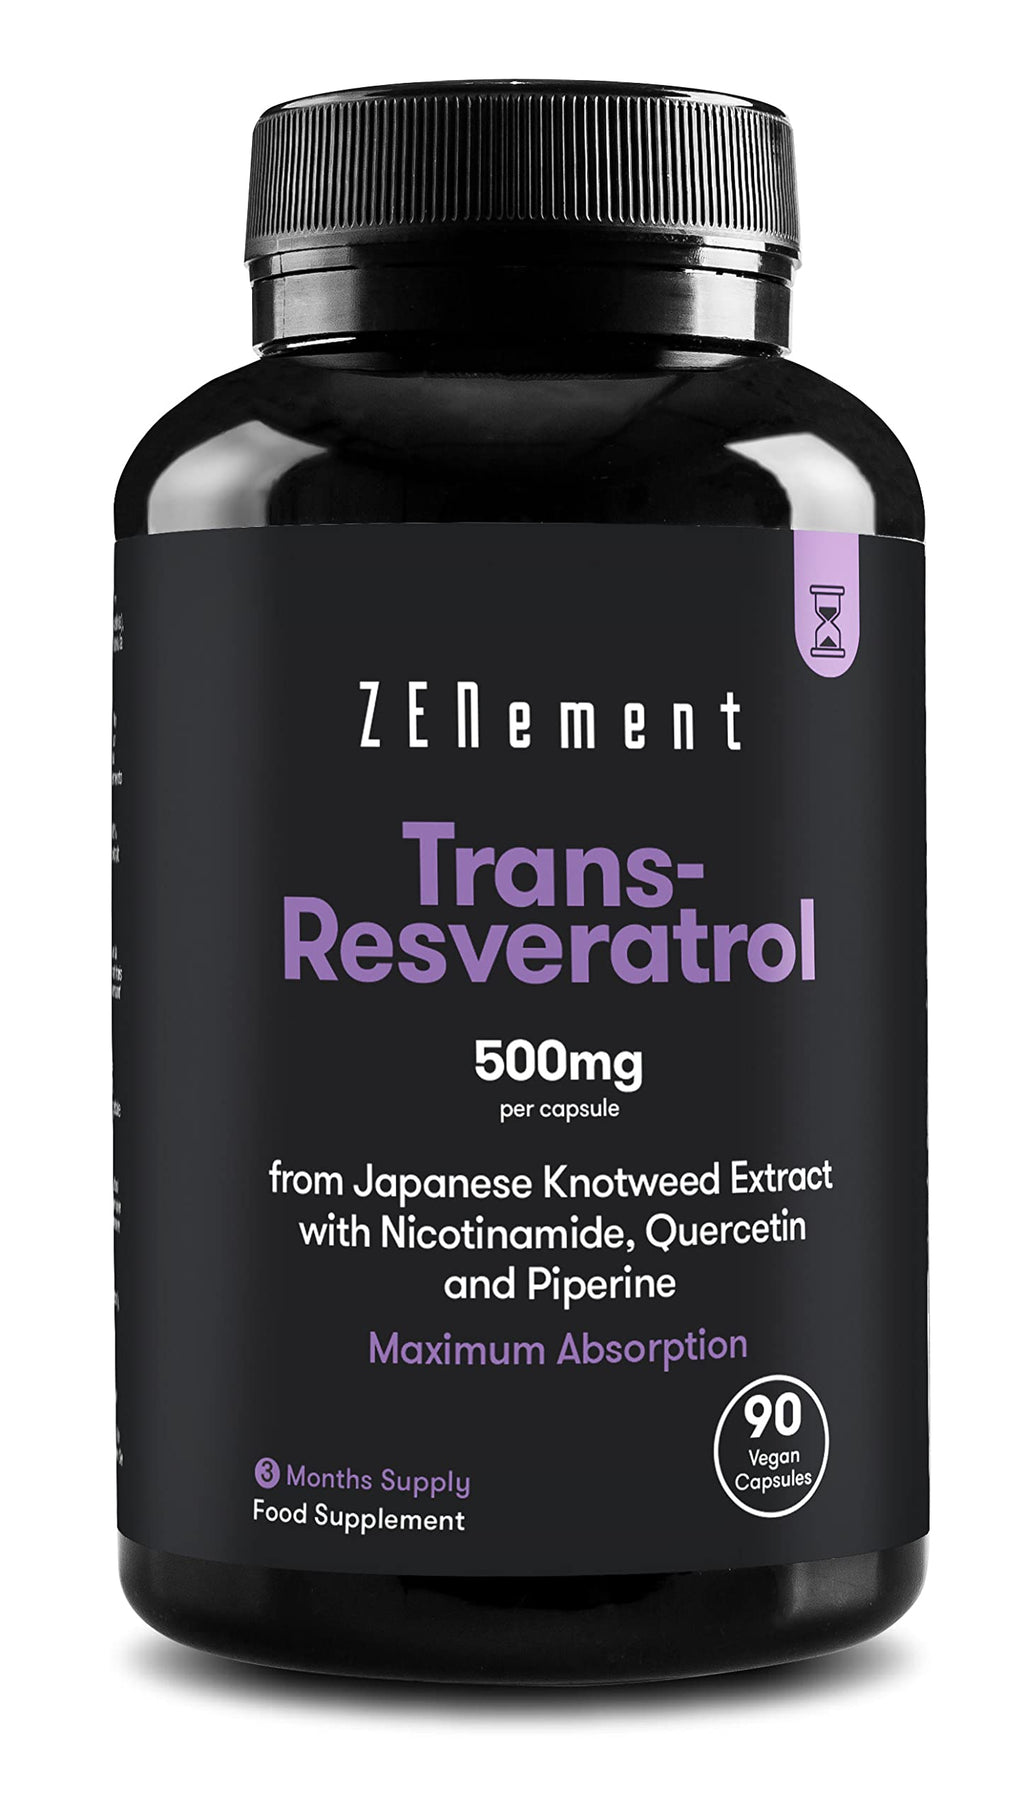 Zenement Trans-Resveratrol 500 Mg, With Nicotinamide, Quercetin And Piperine, 90 Capsules | Anti-Aging, Healthy Aging, Antioxidant | Vegan, Allergy Free, No Preservatives, Gmo Free - NewNest Australia